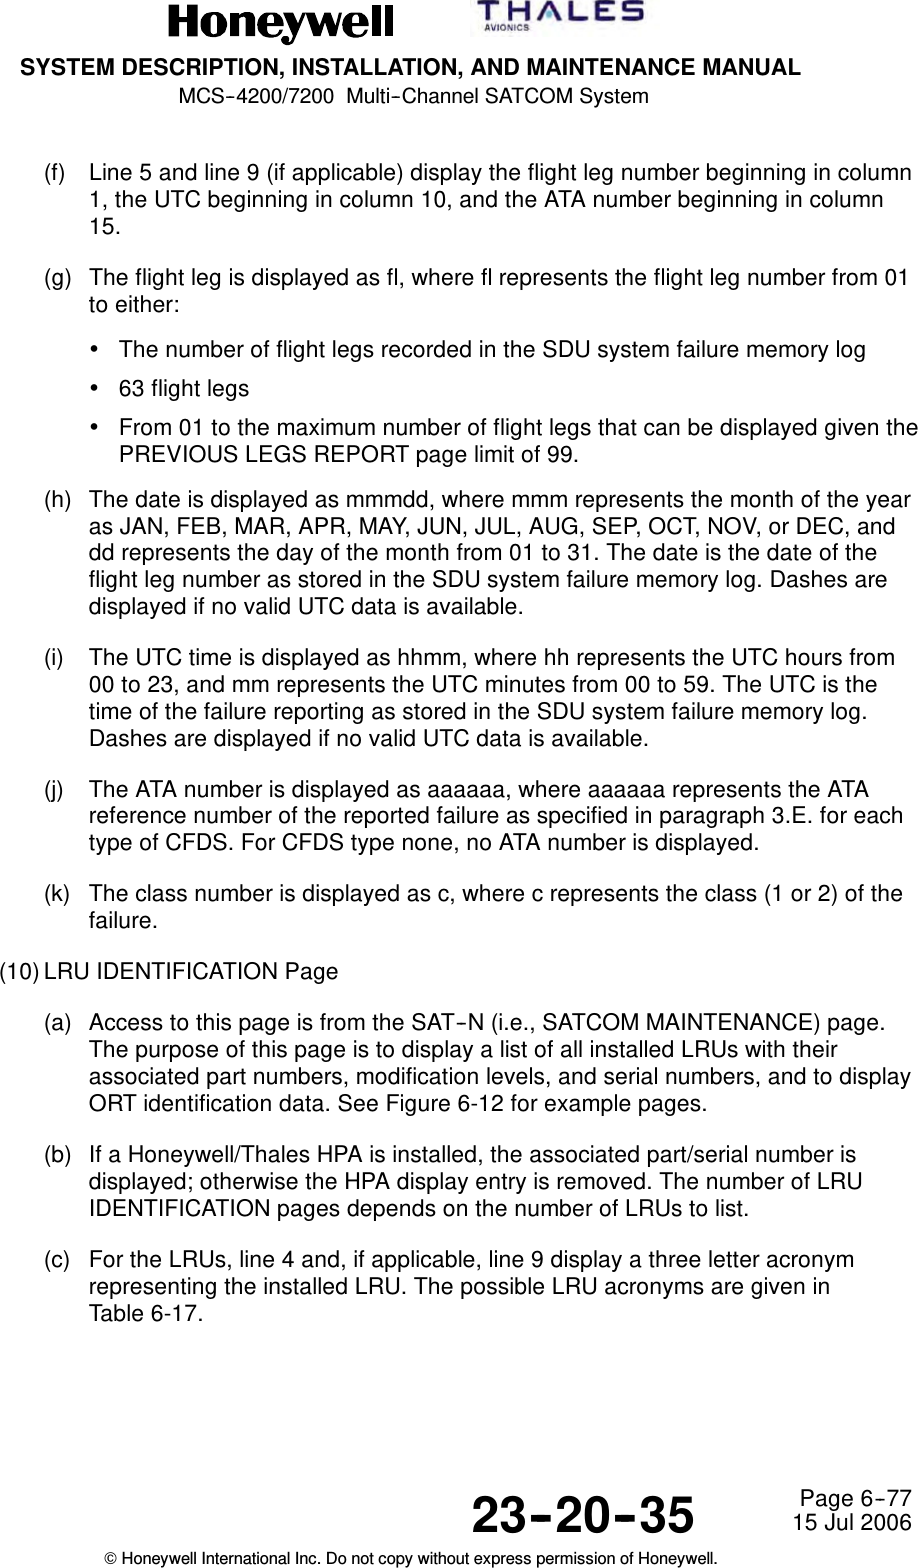 SYSTEM DESCRIPTION, INSTALLATION, AND MAINTENANCE MANUALMCS--4200/7200 Multi--Channel SATCOM System23--20--35 15 Jul 2006Honeywell International Inc. Do not copy without express permission of Honeywell.Page 6--77(f) Line 5 and line 9 (if applicable) display the flight leg number beginning in column1, the UTC beginning in column 10, and the ATA number beginning in column15.(g) The flight leg is displayed as fl, where fl represents the flight leg number from 01to either:•The number of flight legs recorded in the SDU system failure memory log•63 flight legs•From 01 to the maximum number of flight legs that can be displayed given thePREVIOUS LEGS REPORT page limit of 99.(h) The date is displayed as mmmdd, where mmm represents the month of the yearas JAN, FEB, MAR, APR, MAY, JUN, JUL, AUG, SEP, OCT, NOV, or DEC, anddd represents the day of the month from 01 to 31. The date is the date of theflight leg number as stored in the SDU system failure memory log. Dashes aredisplayed if no valid UTC data is available.(i) The UTC time is displayed as hhmm, where hh represents the UTC hours from00 to 23, and mm represents the UTC minutes from 00 to 59. The UTC is thetime of the failure reporting as stored in the SDU system failure memory log.Dashes are displayed if no valid UTC data is available.(j) The ATA number is displayed as aaaaaa, where aaaaaa represents the ATAreference number of the reported failure as specified in paragraph 3.E. for eachtype of CFDS. For CFDS type none, no ATA number is displayed.(k) The class number is displayed as c, where c represents the class (1 or 2) of thefailure.(10) LRU IDENTIFICATION Page(a) Access to this page is from the SAT--N (i.e., SATCOM MAINTENANCE) page.The purpose of this page is to display a list of all installed LRUs with theirassociated part numbers, modification levels, and serial numbers, and to displayORT identification data. See Figure 6-12 for example pages.(b) If a Honeywell/Thales HPA is installed, the associated part/serial number isdisplayed; otherwise the HPA display entry is removed. The number of LRUIDENTIFICATION pages depends on the number of LRUs to list.(c) For the LRUs, line 4 and, if applicable, line 9 display a three letter acronymrepresenting the installed LRU. The possible LRU acronyms are given inTable 6-17.